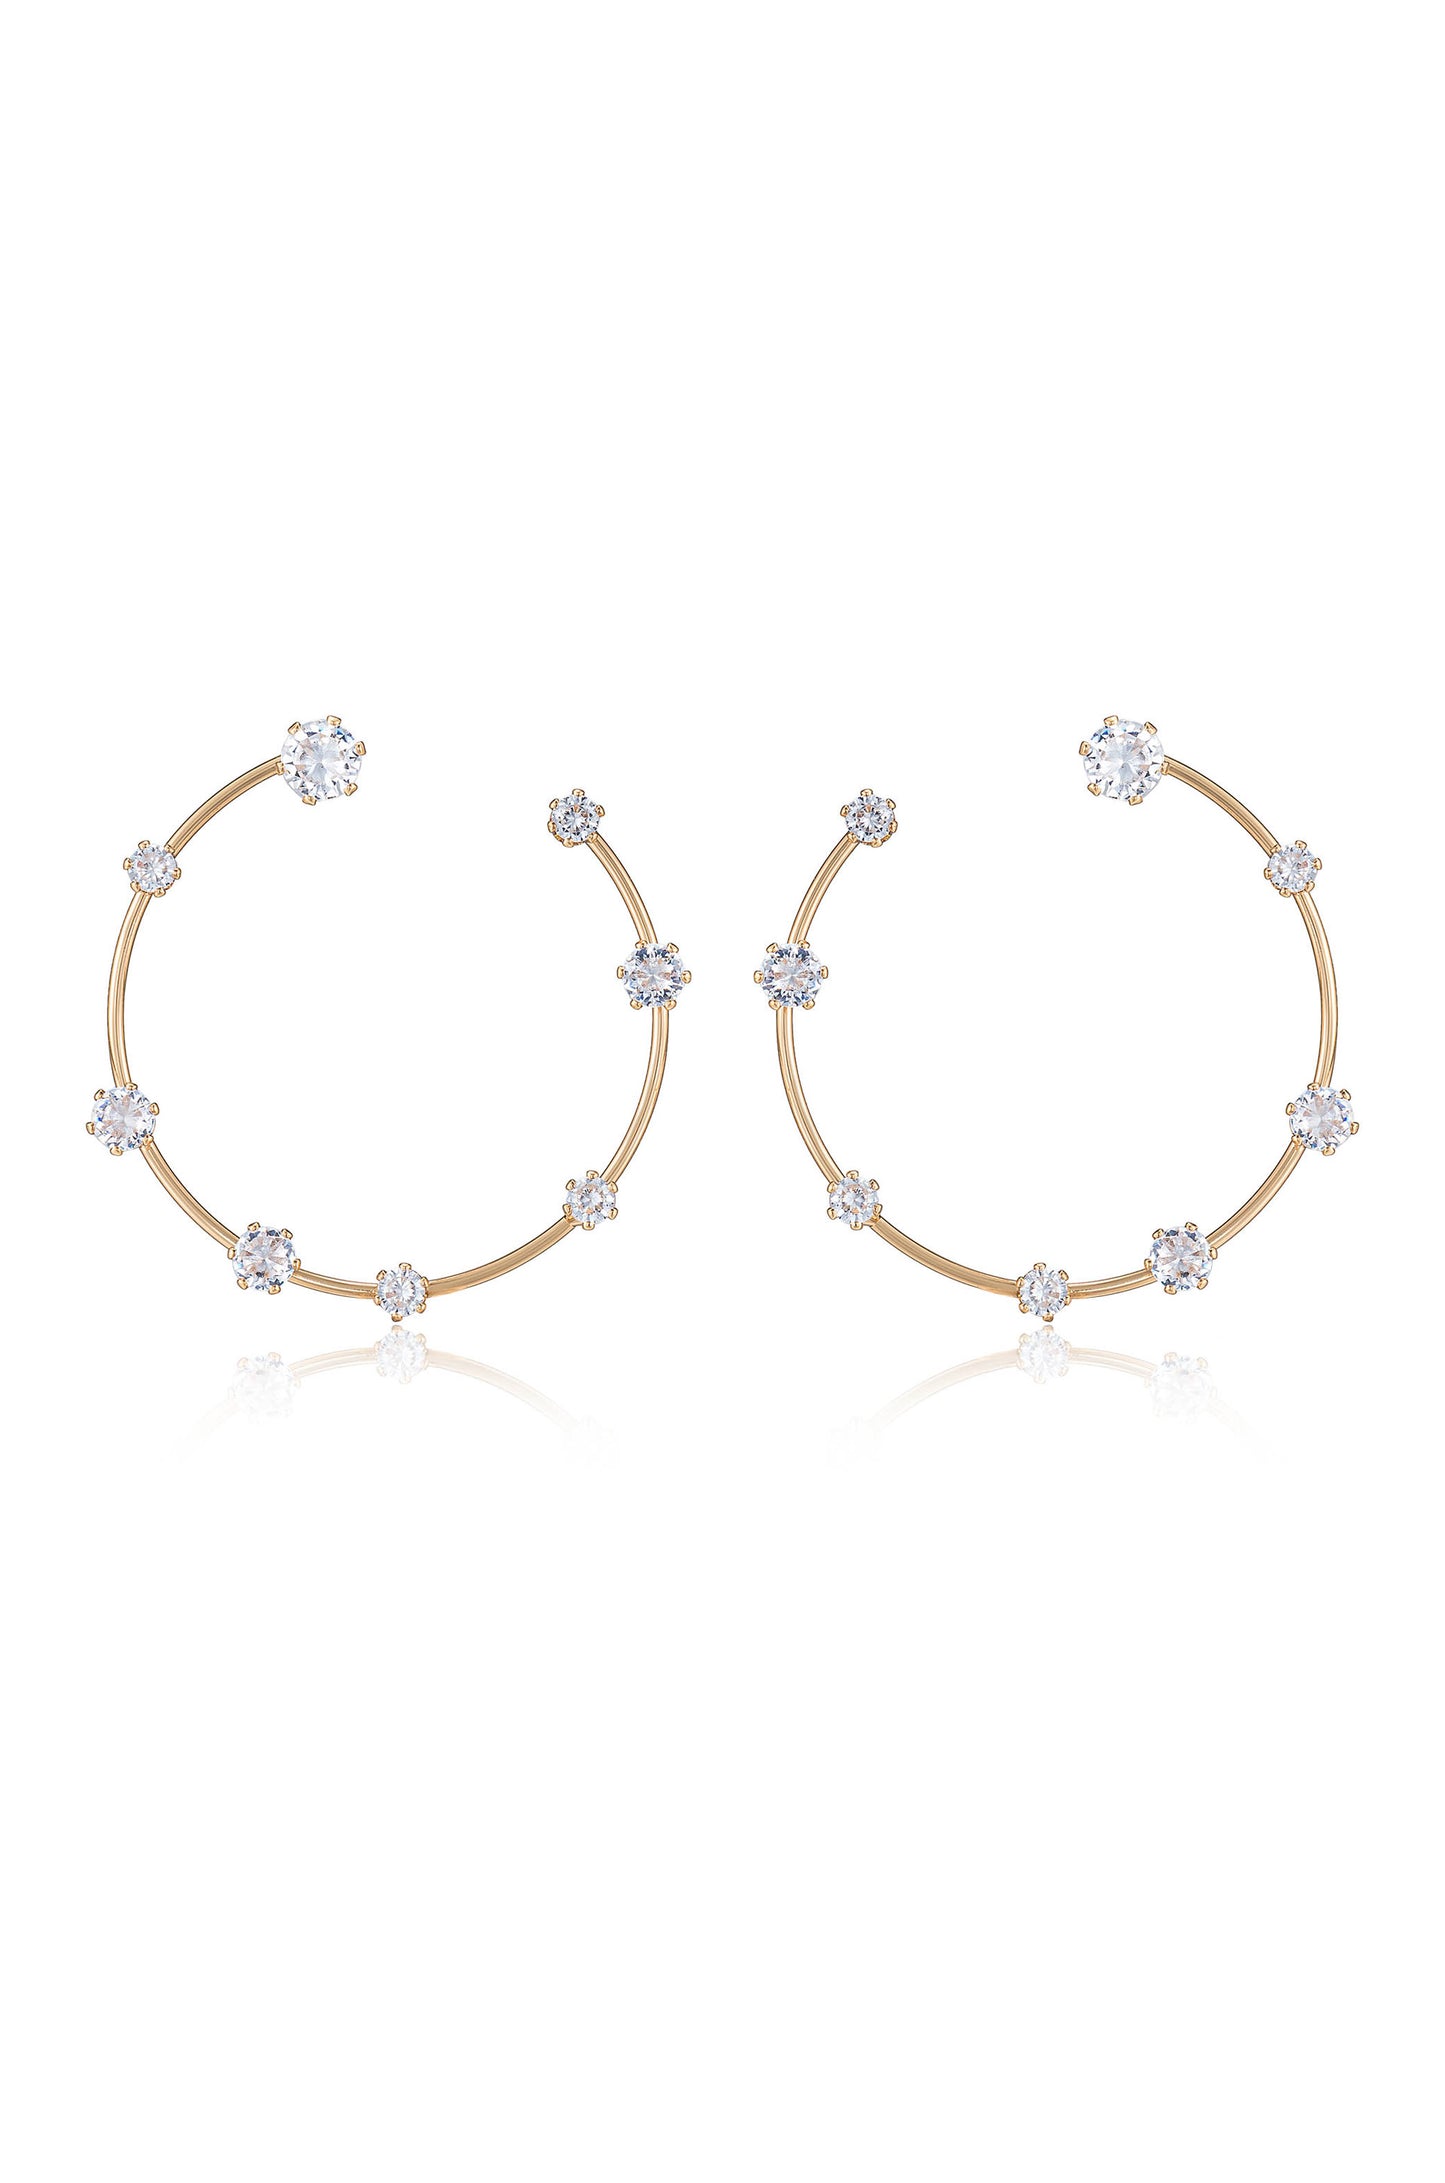 Celestial Large Wire & Crystal Ring 18k Gold Plated Earrings